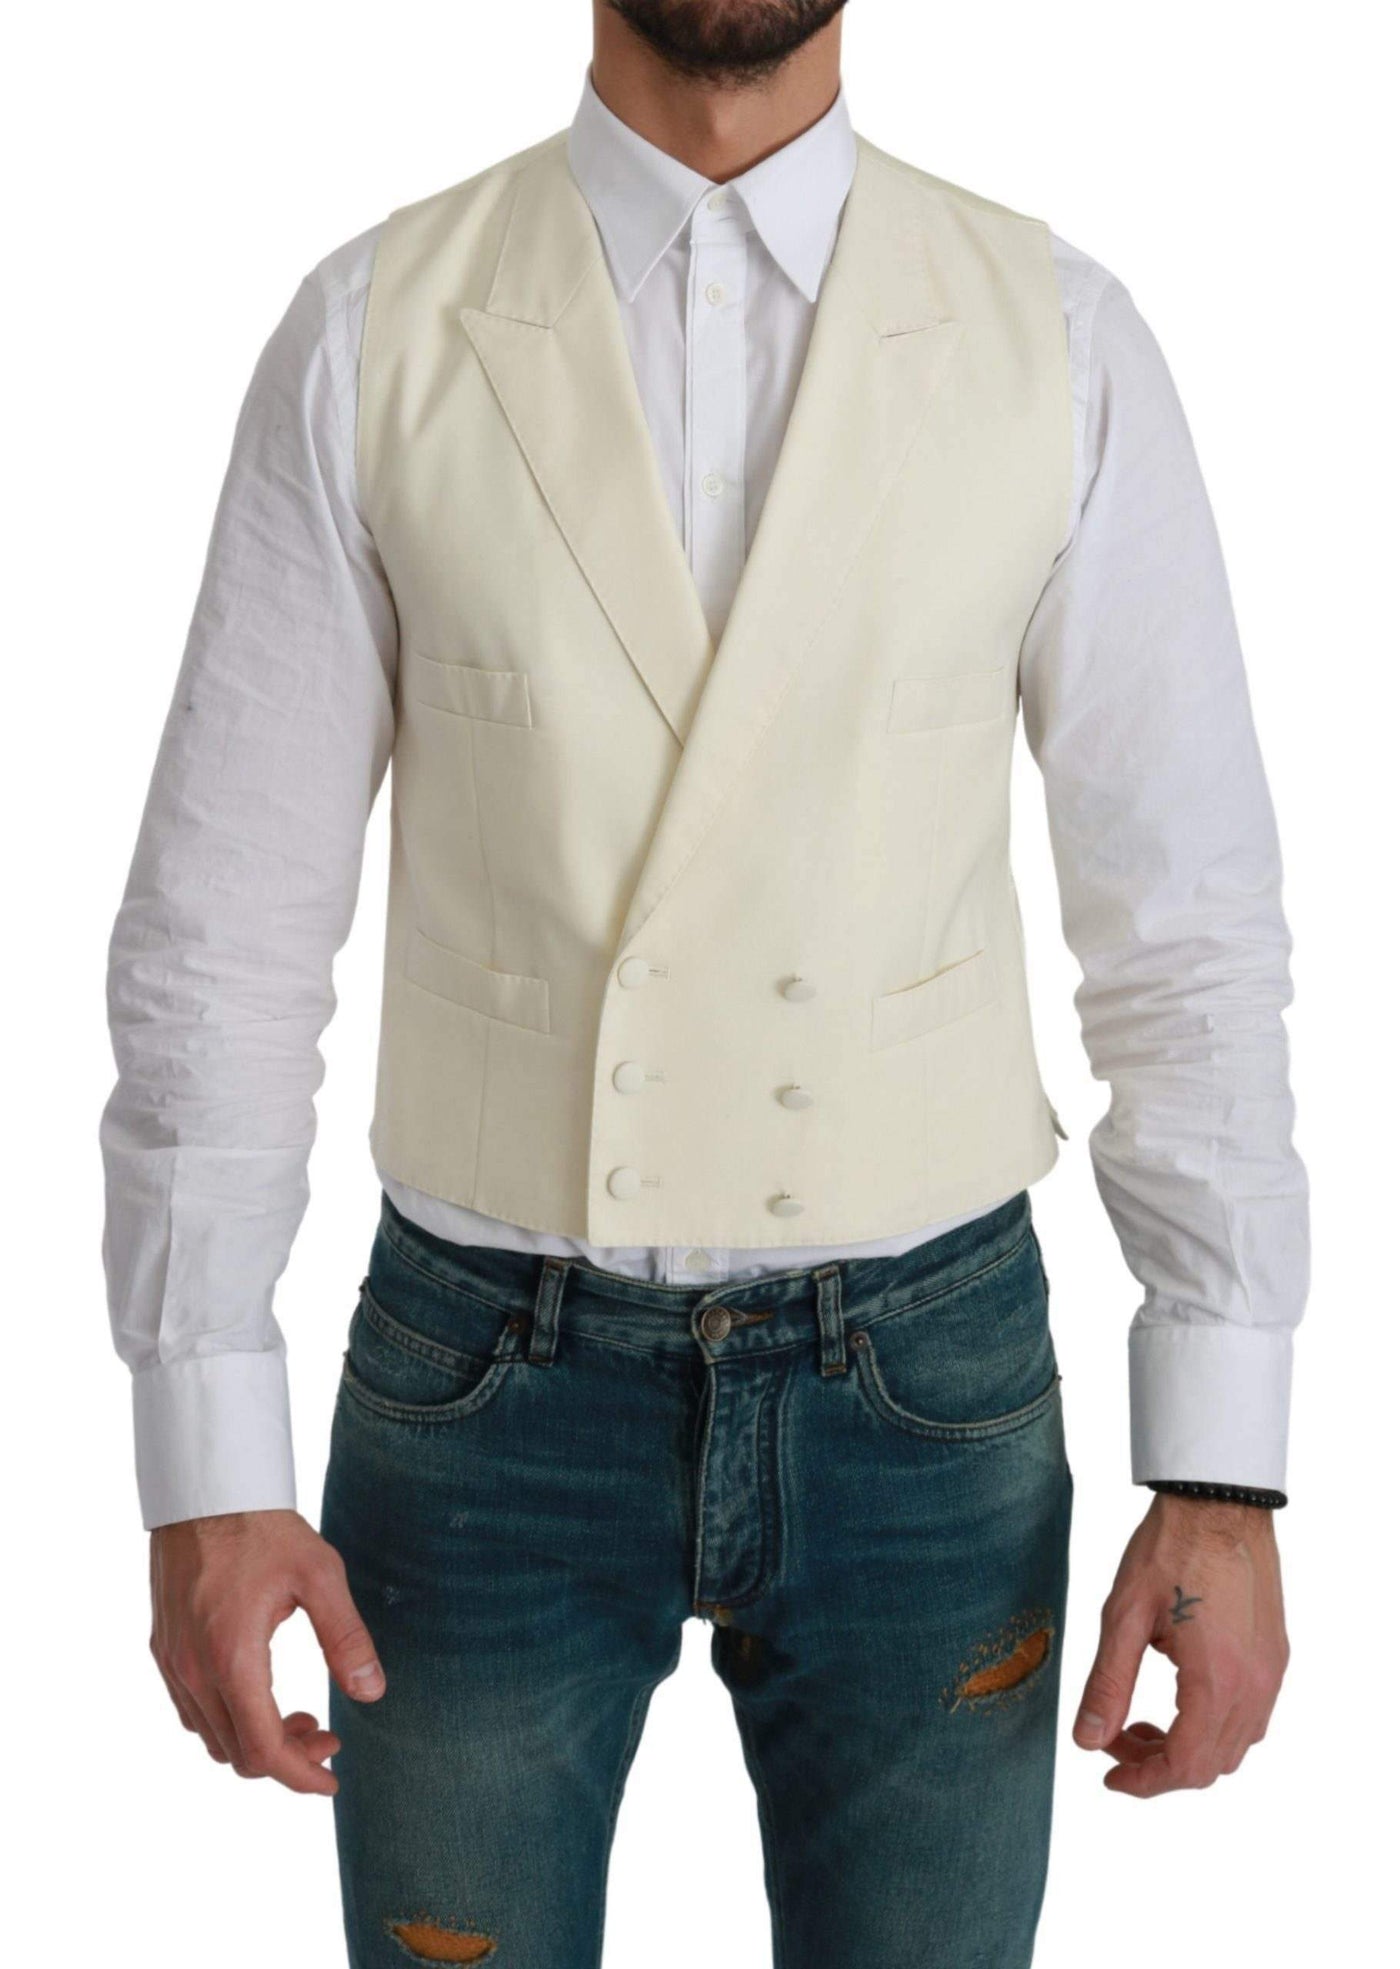 Dolce & Gabbana White Waistcoat Formal Wool  Vest #men, Brand_Dolce & Gabbana, Catch, Dolce & Gabbana, feed-agegroup-adult, feed-color-white, feed-gender-male, feed-size-IT44 | XS, feed-size-IT46 | S, feed-size-IT52 | L, feed-size-IT54 | XL, feed-size-IT56 | XL, feed-size-IT58 | XXL, feed-size-IT60 | 3XL, Gender_Men, IT44 | XS, IT46 | S, IT52 | L, IT54 | XL, IT56 | XL, IT58 | XXL, IT60 | 3XL, Kogan, Men - New Arrivals, Vests - Men - Clothing, White at SEYMAYKA